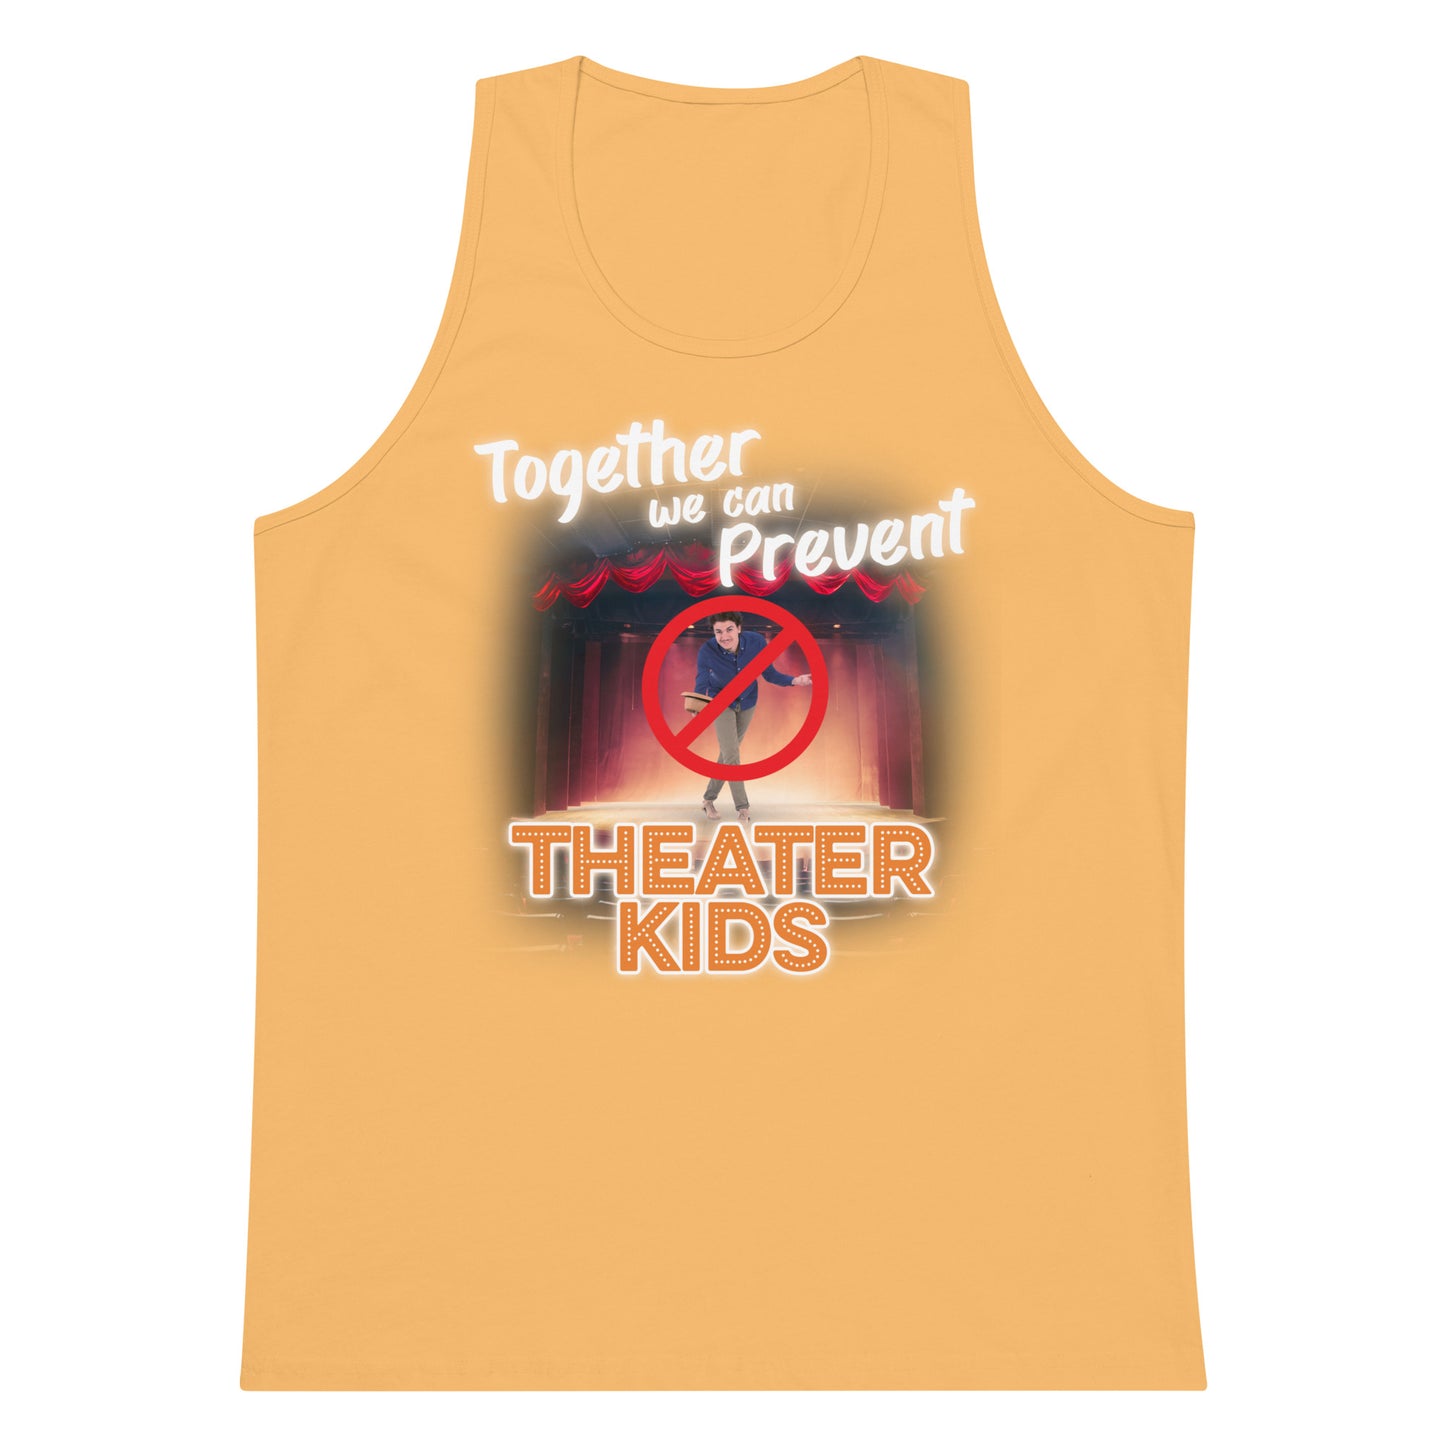 Together We Can Prevent Theater Kids tank top